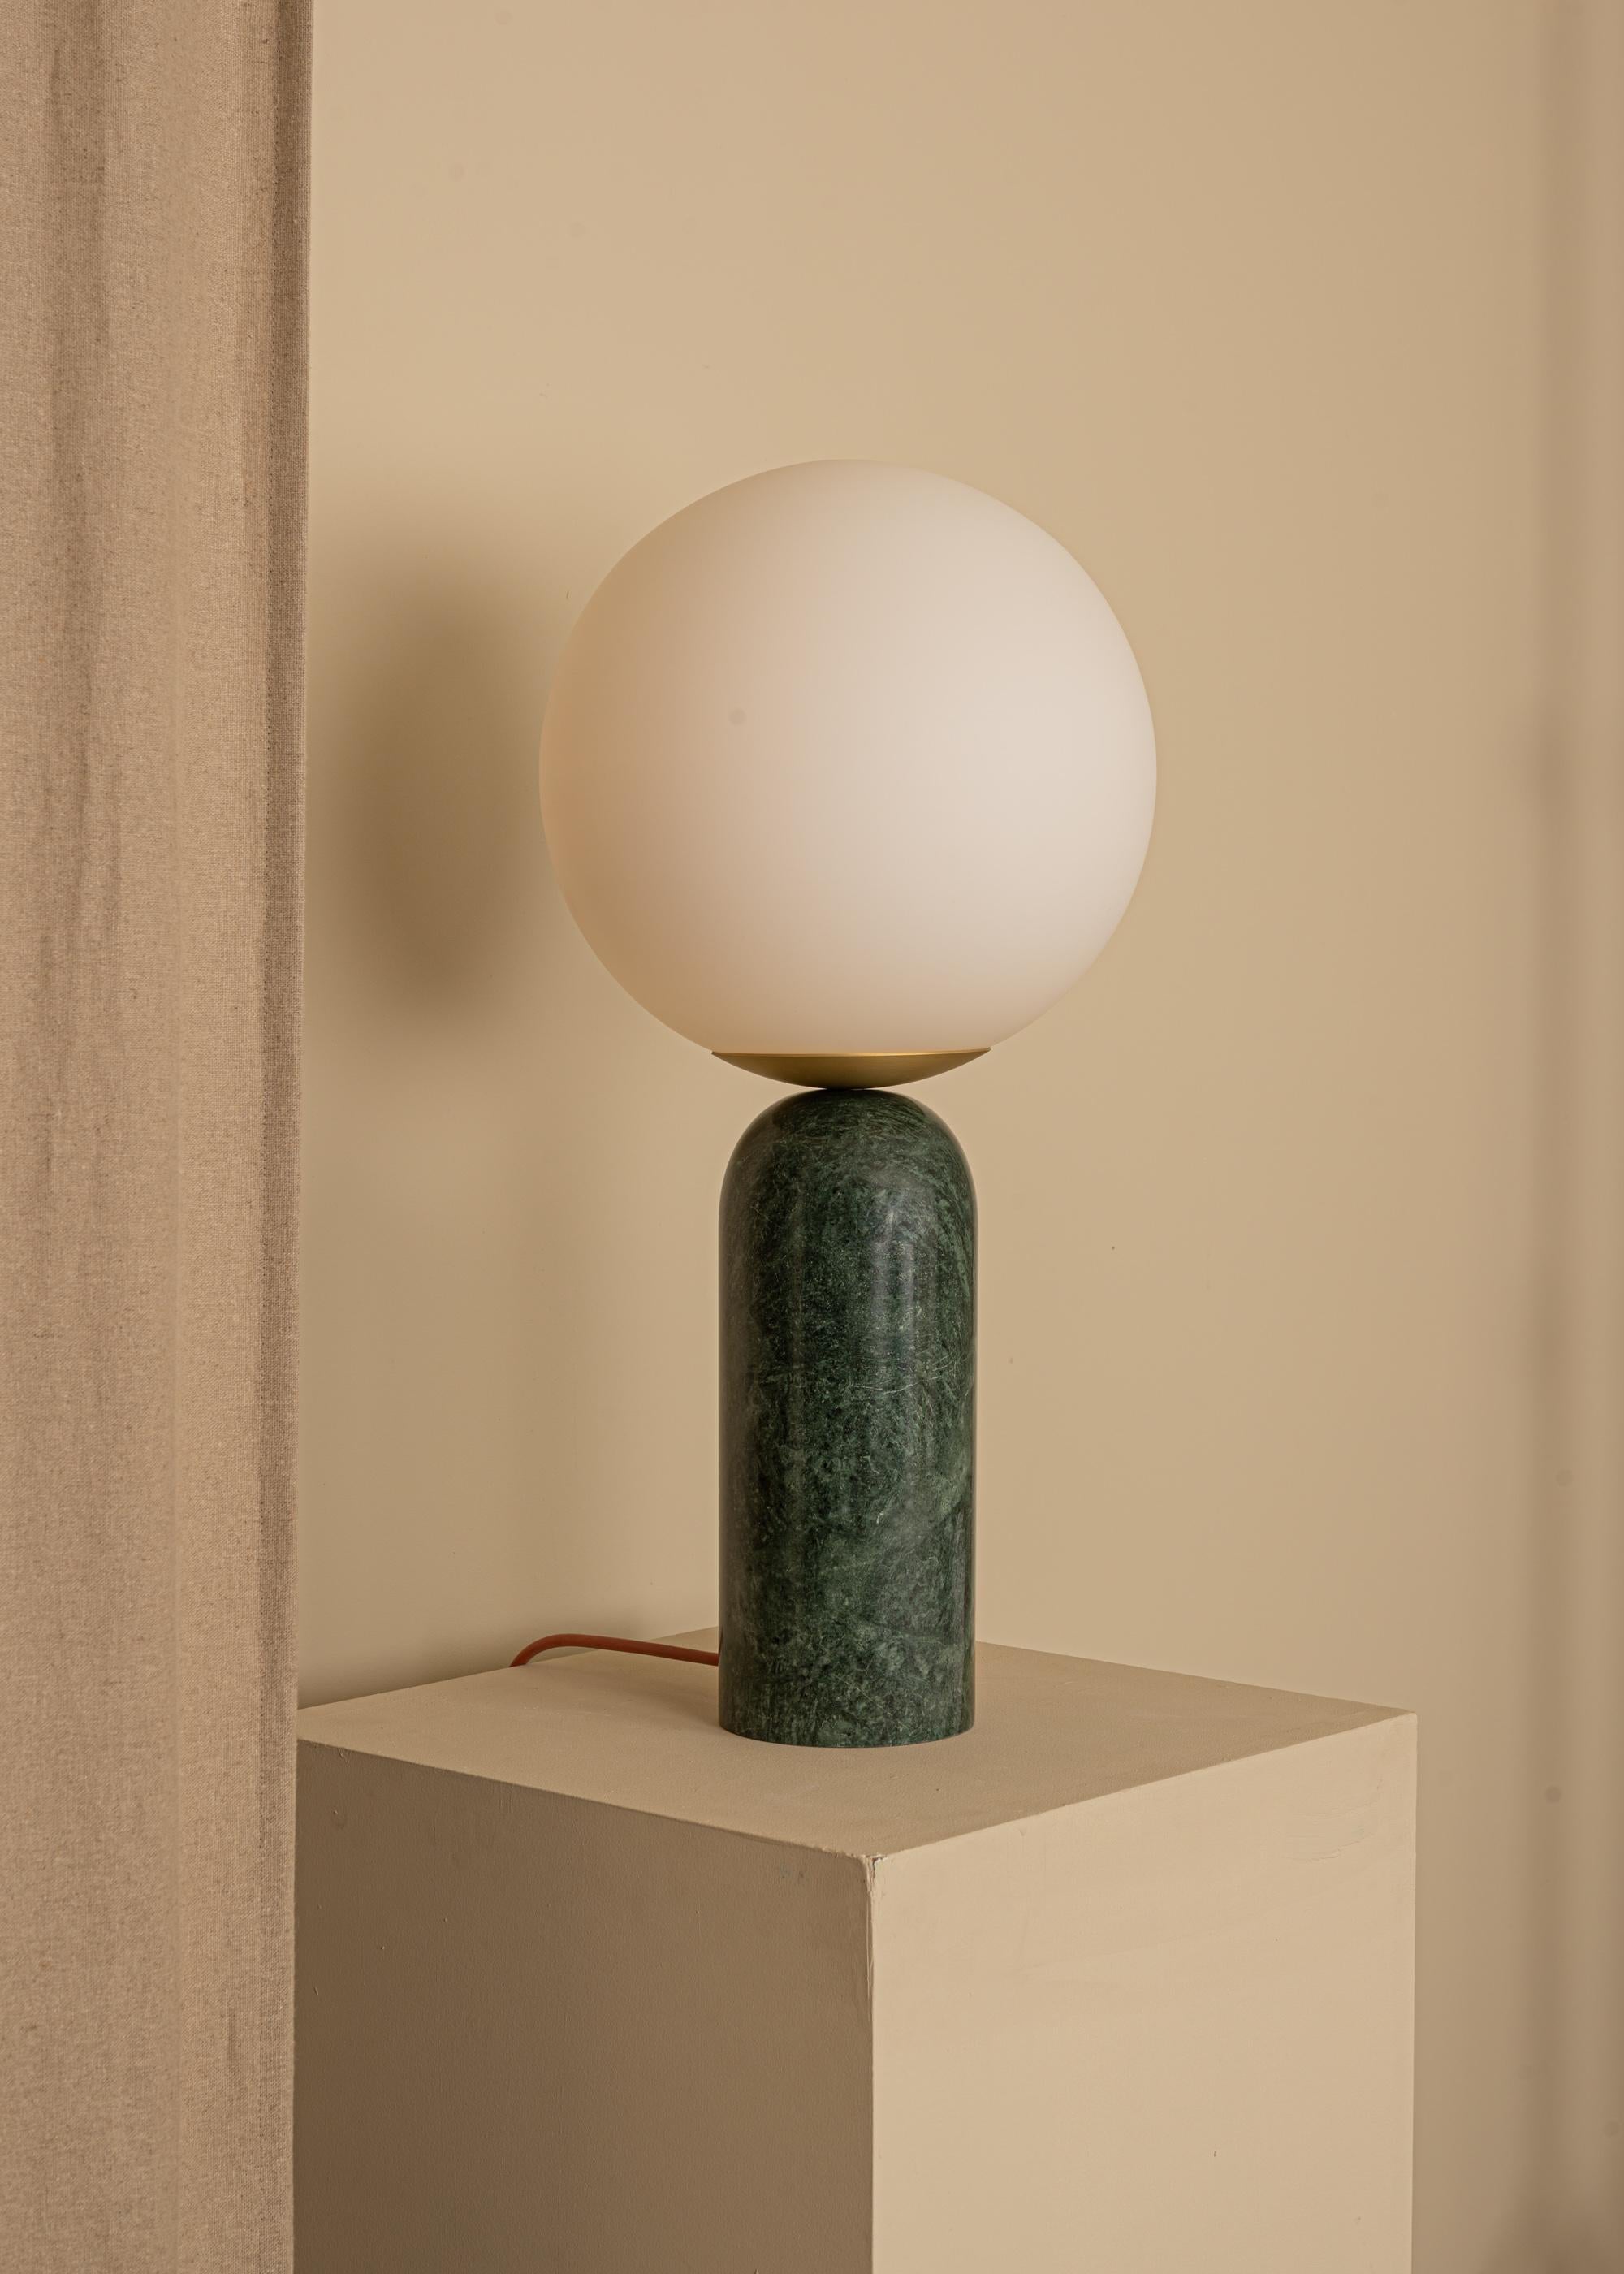 Green Marble and Brass Atlas Table Lamp by Simone & Marcel
Dimensions: Ø 30 x H 60 cm.
Materials: Glass, brass and green marble.

Also available in different marble, wood and alabaster options and finishes. Custom options available on request.